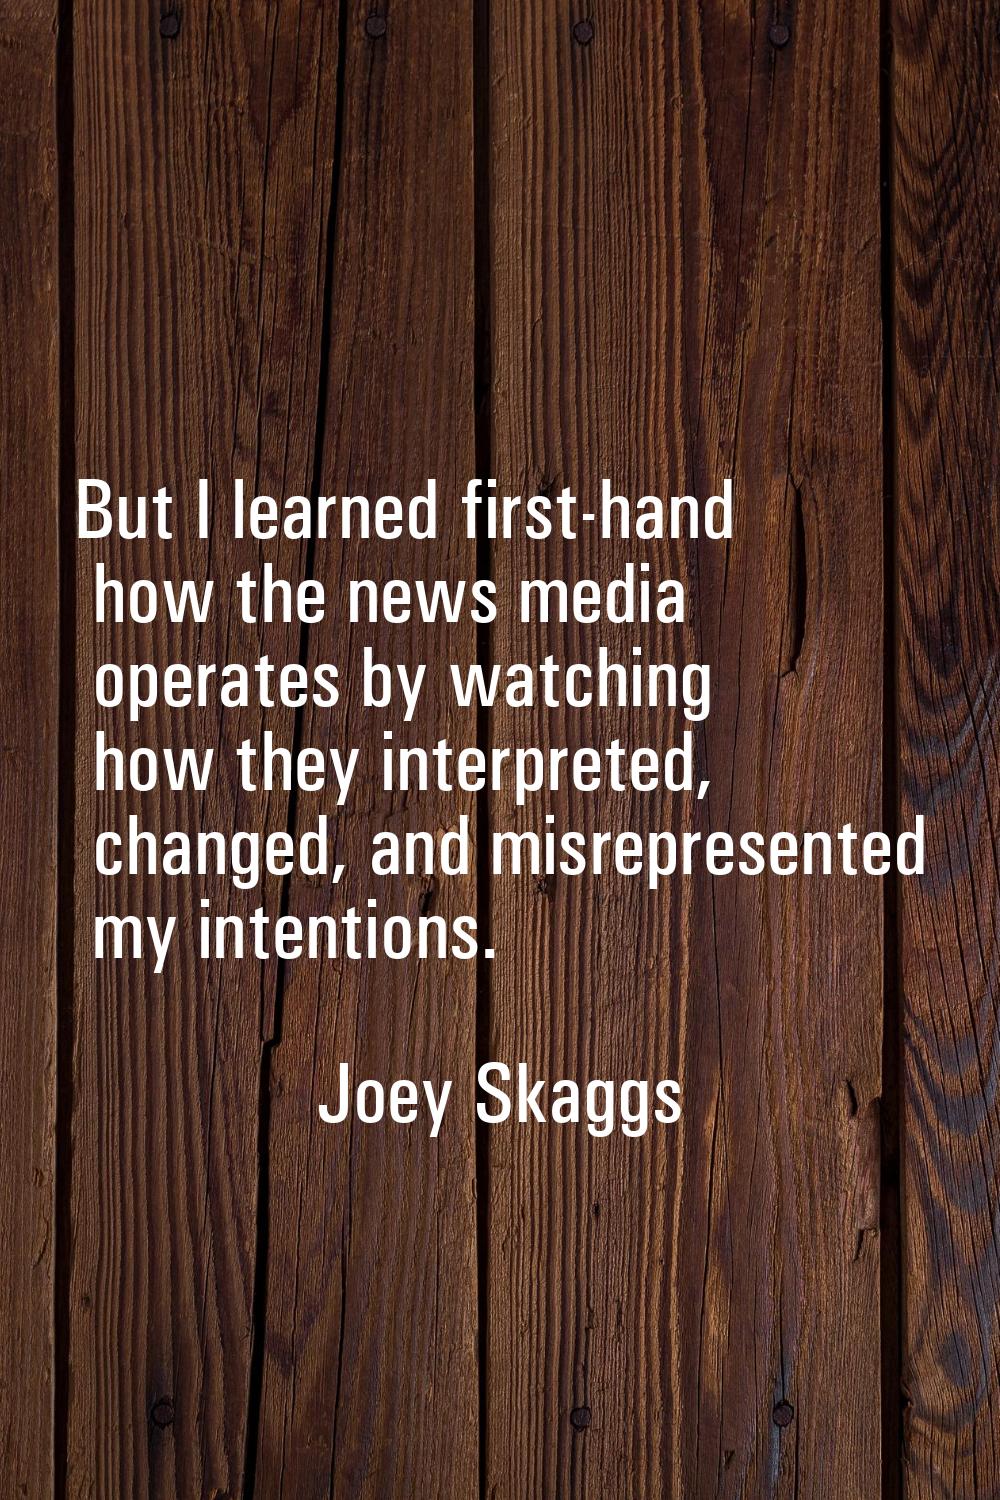 But I learned first-hand how the news media operates by watching how they interpreted, changed, and